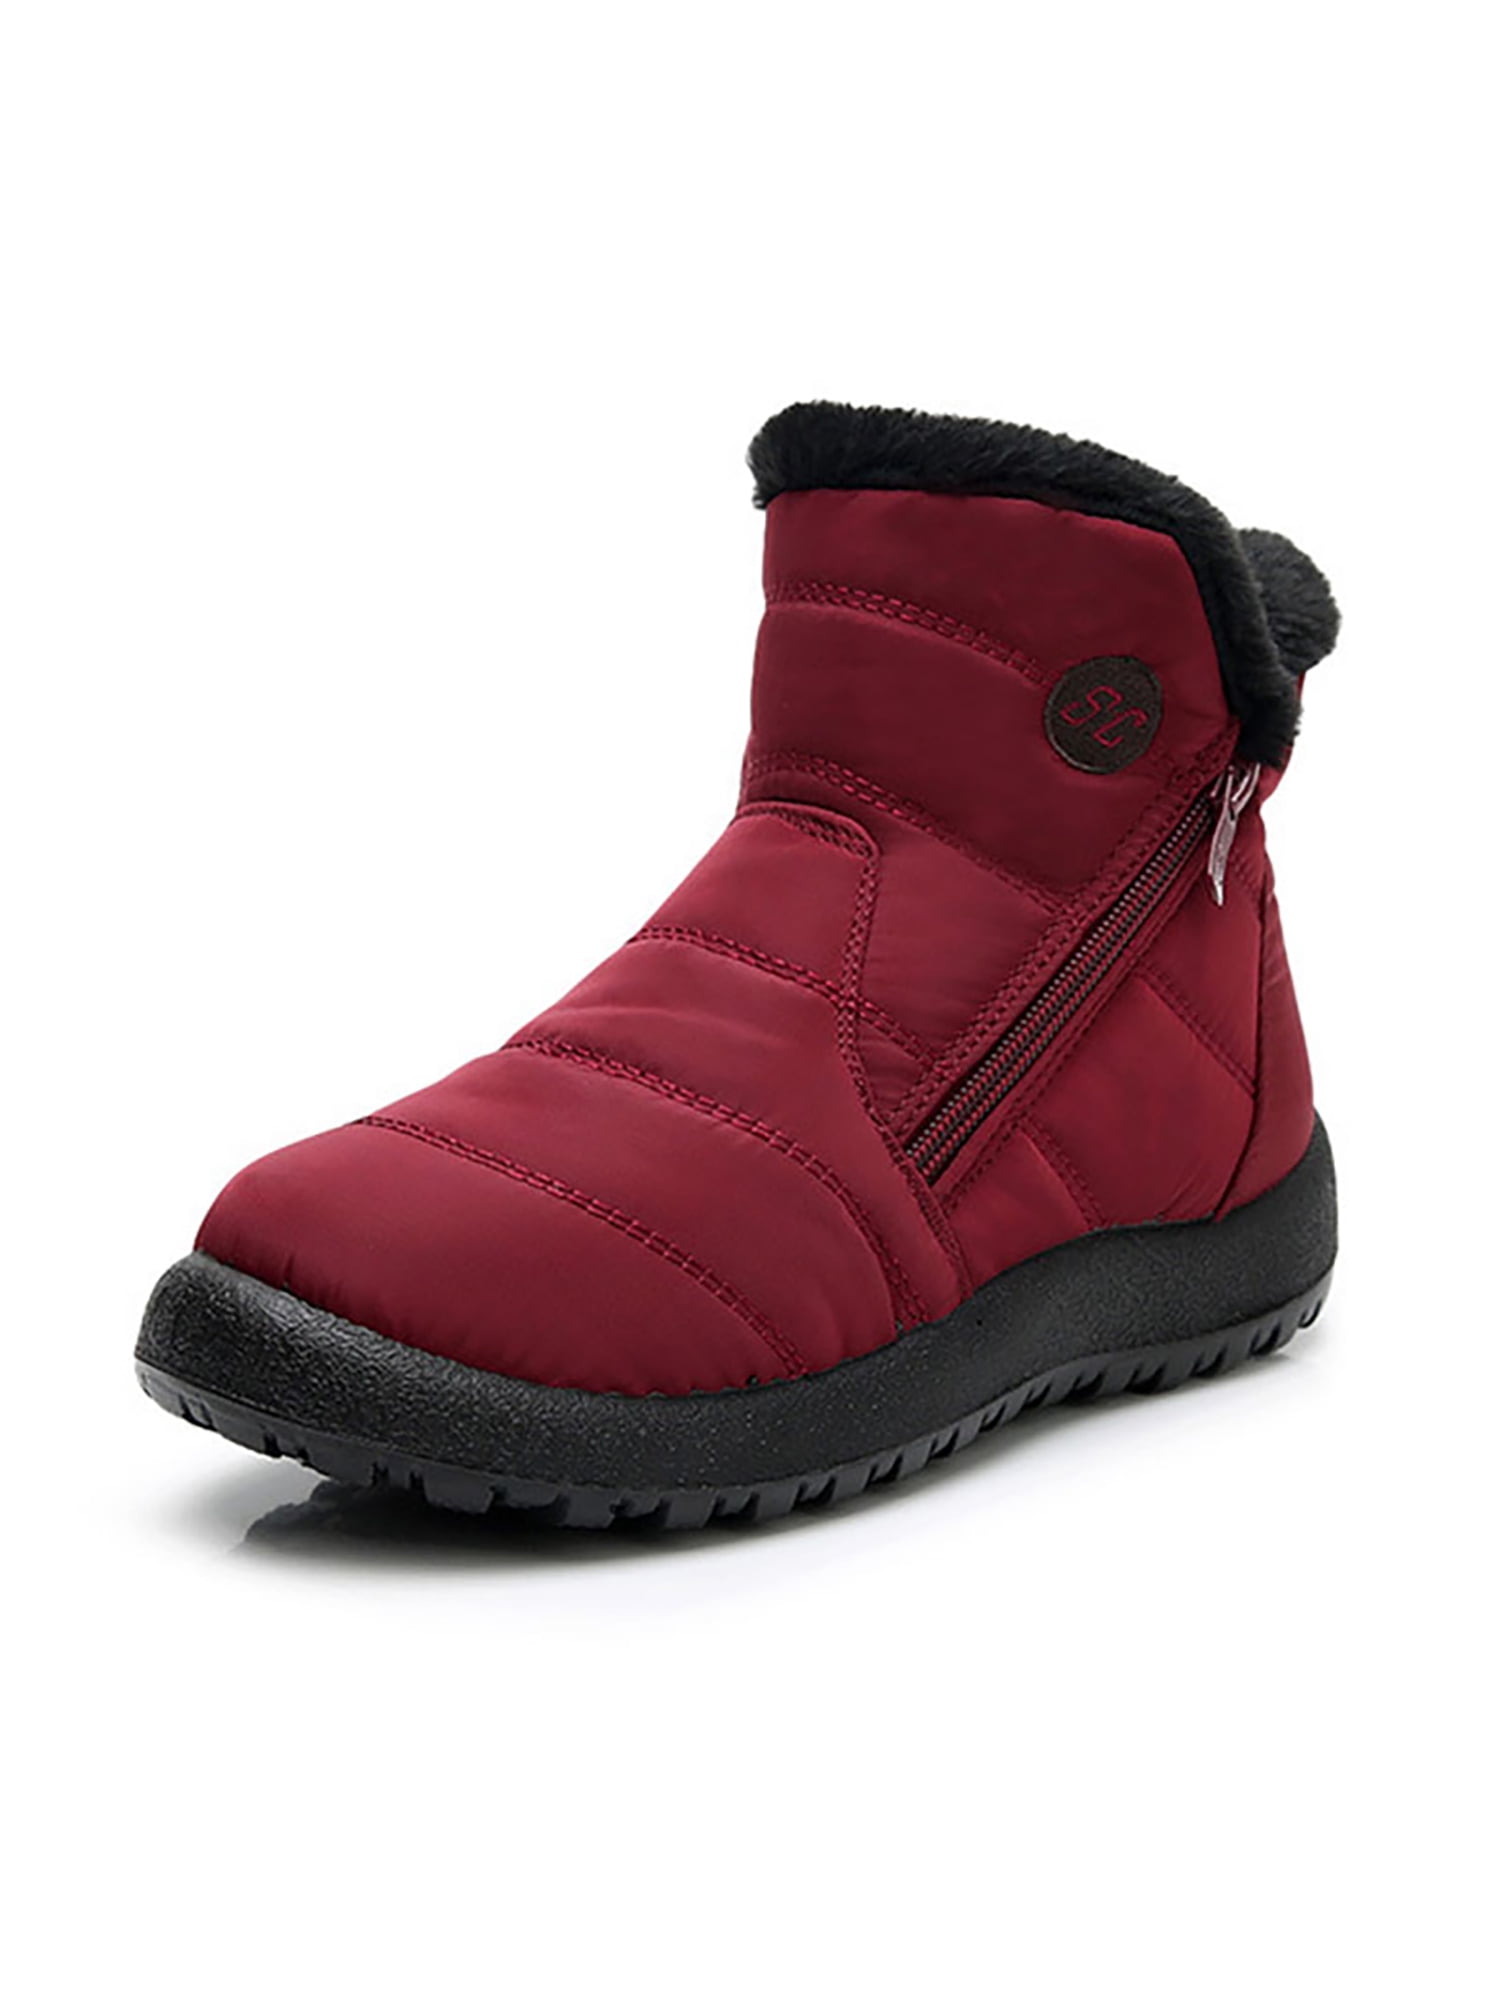 Winter Men's Women's Snow Boot Outdoor Anti-skid Slip On Athletic Ankle Shoes US 